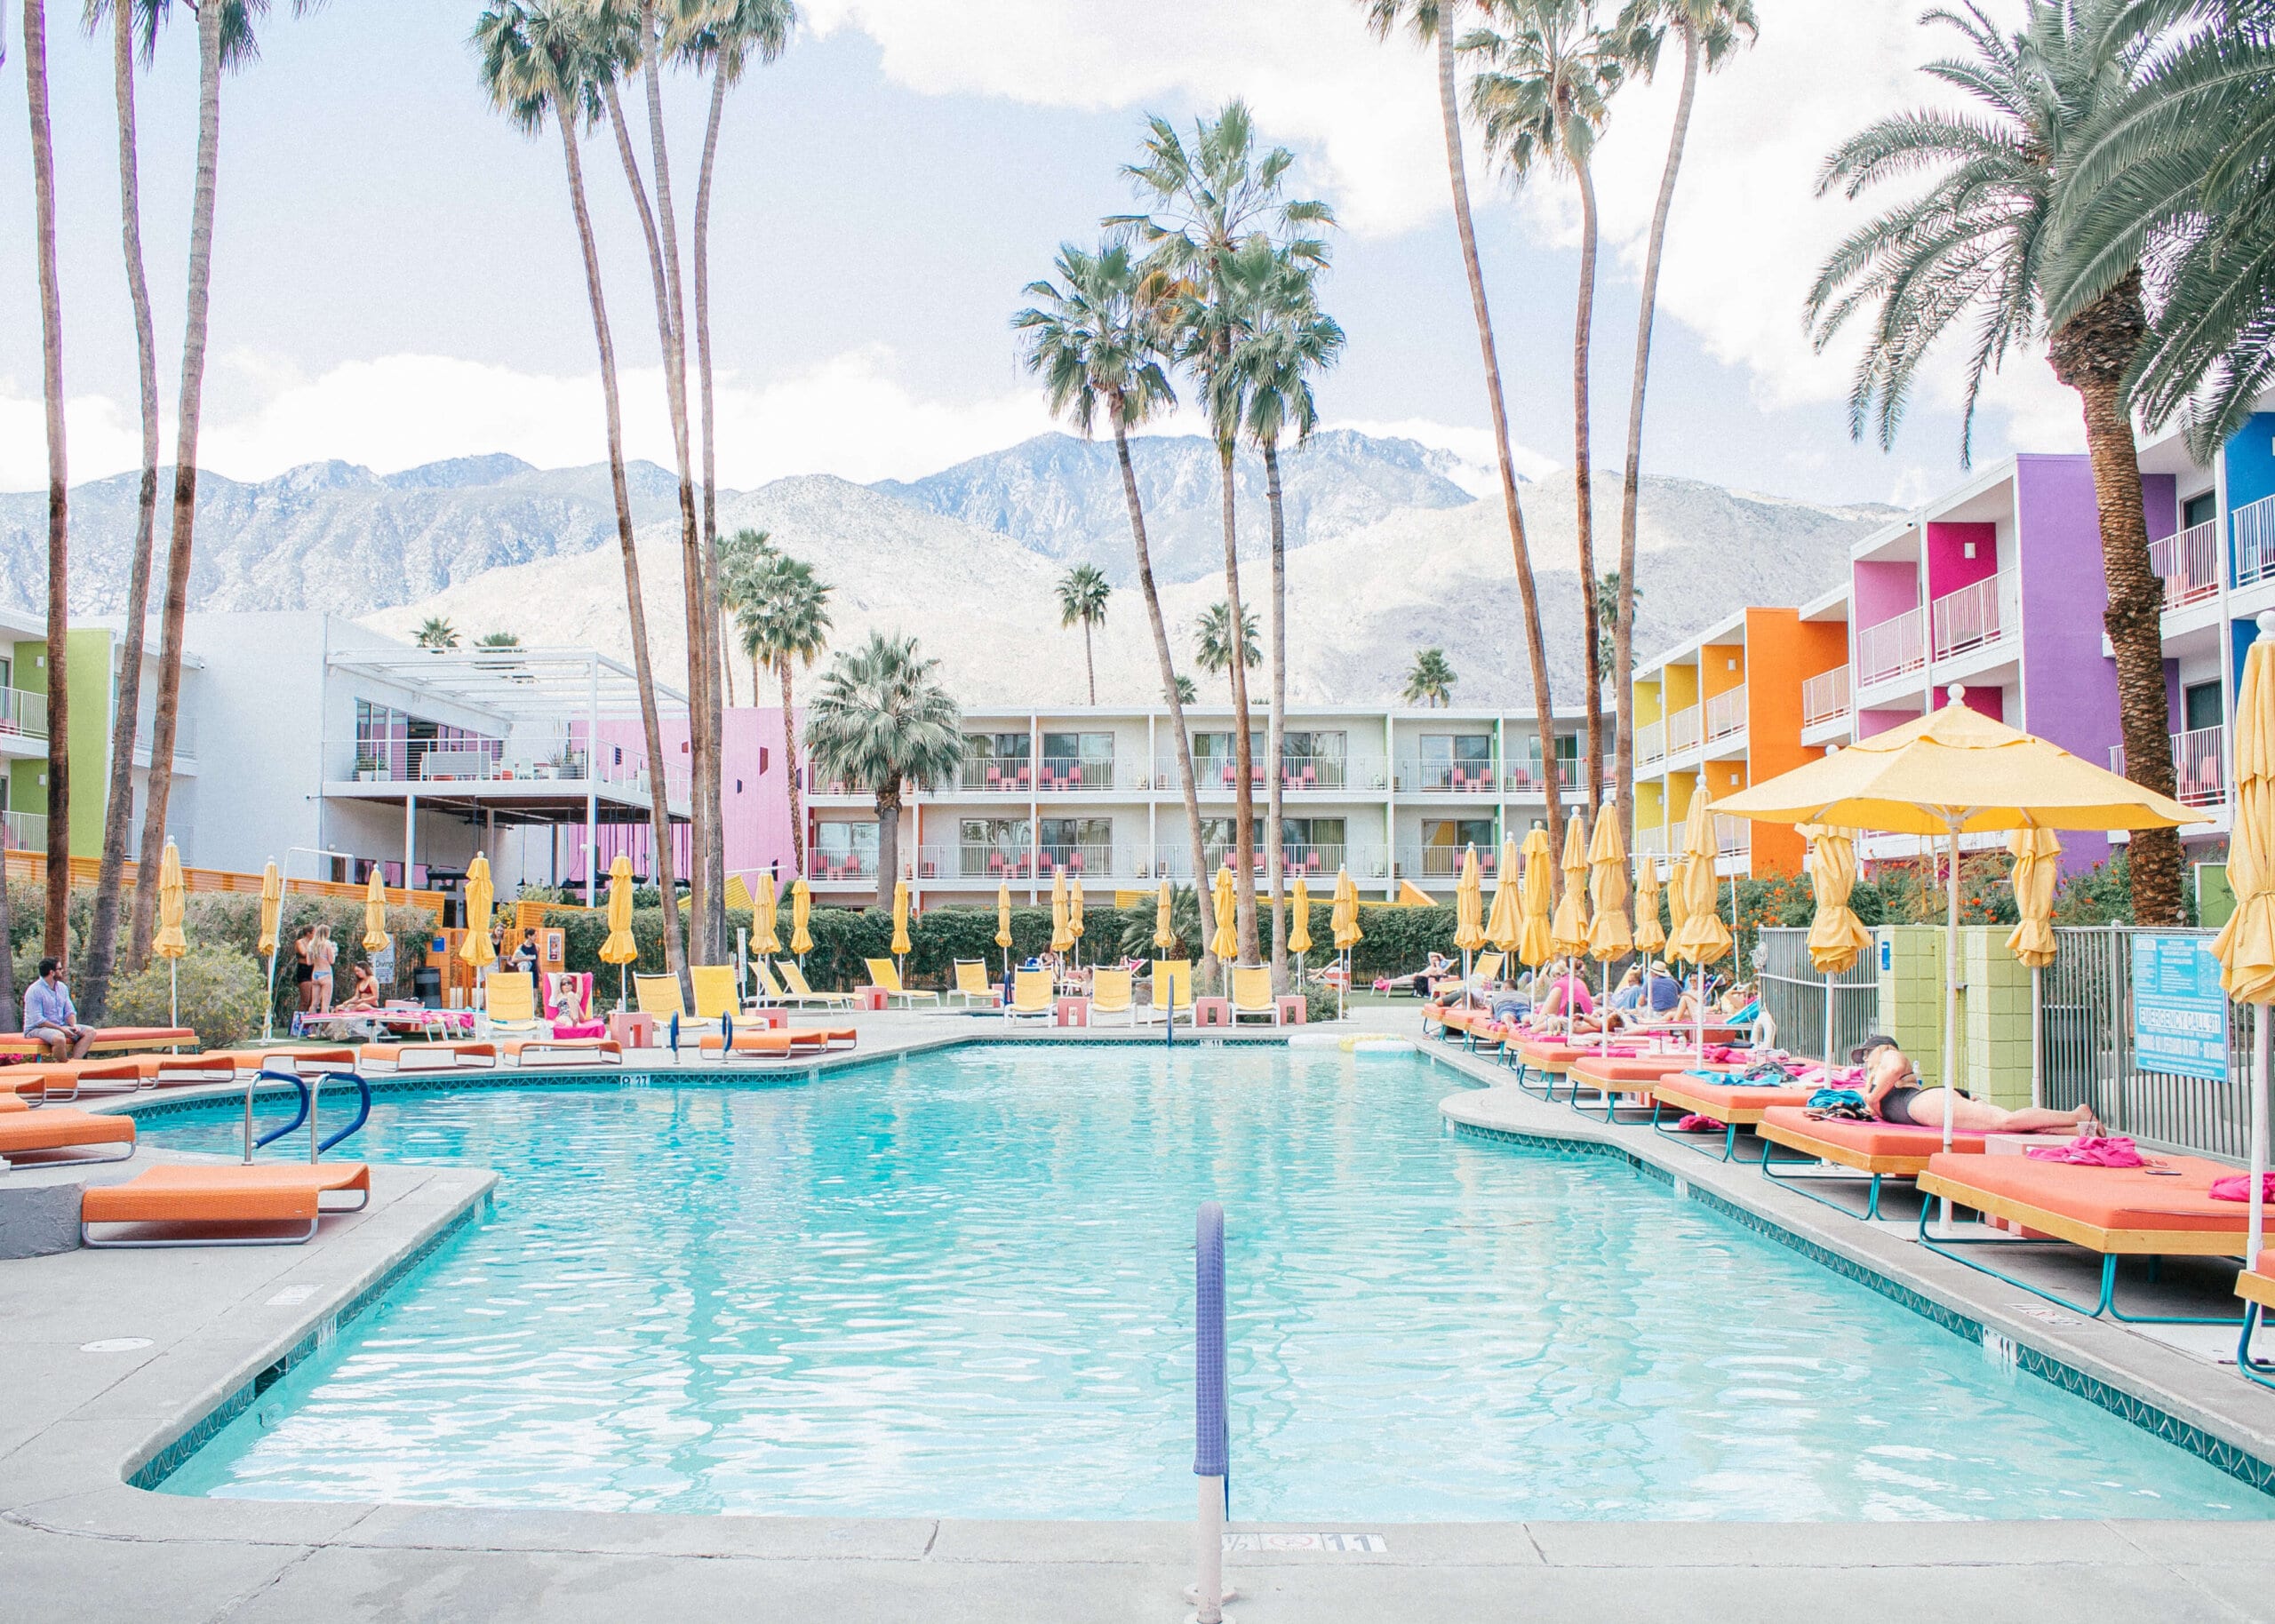 12 Fun Things to Do in Palm Springs